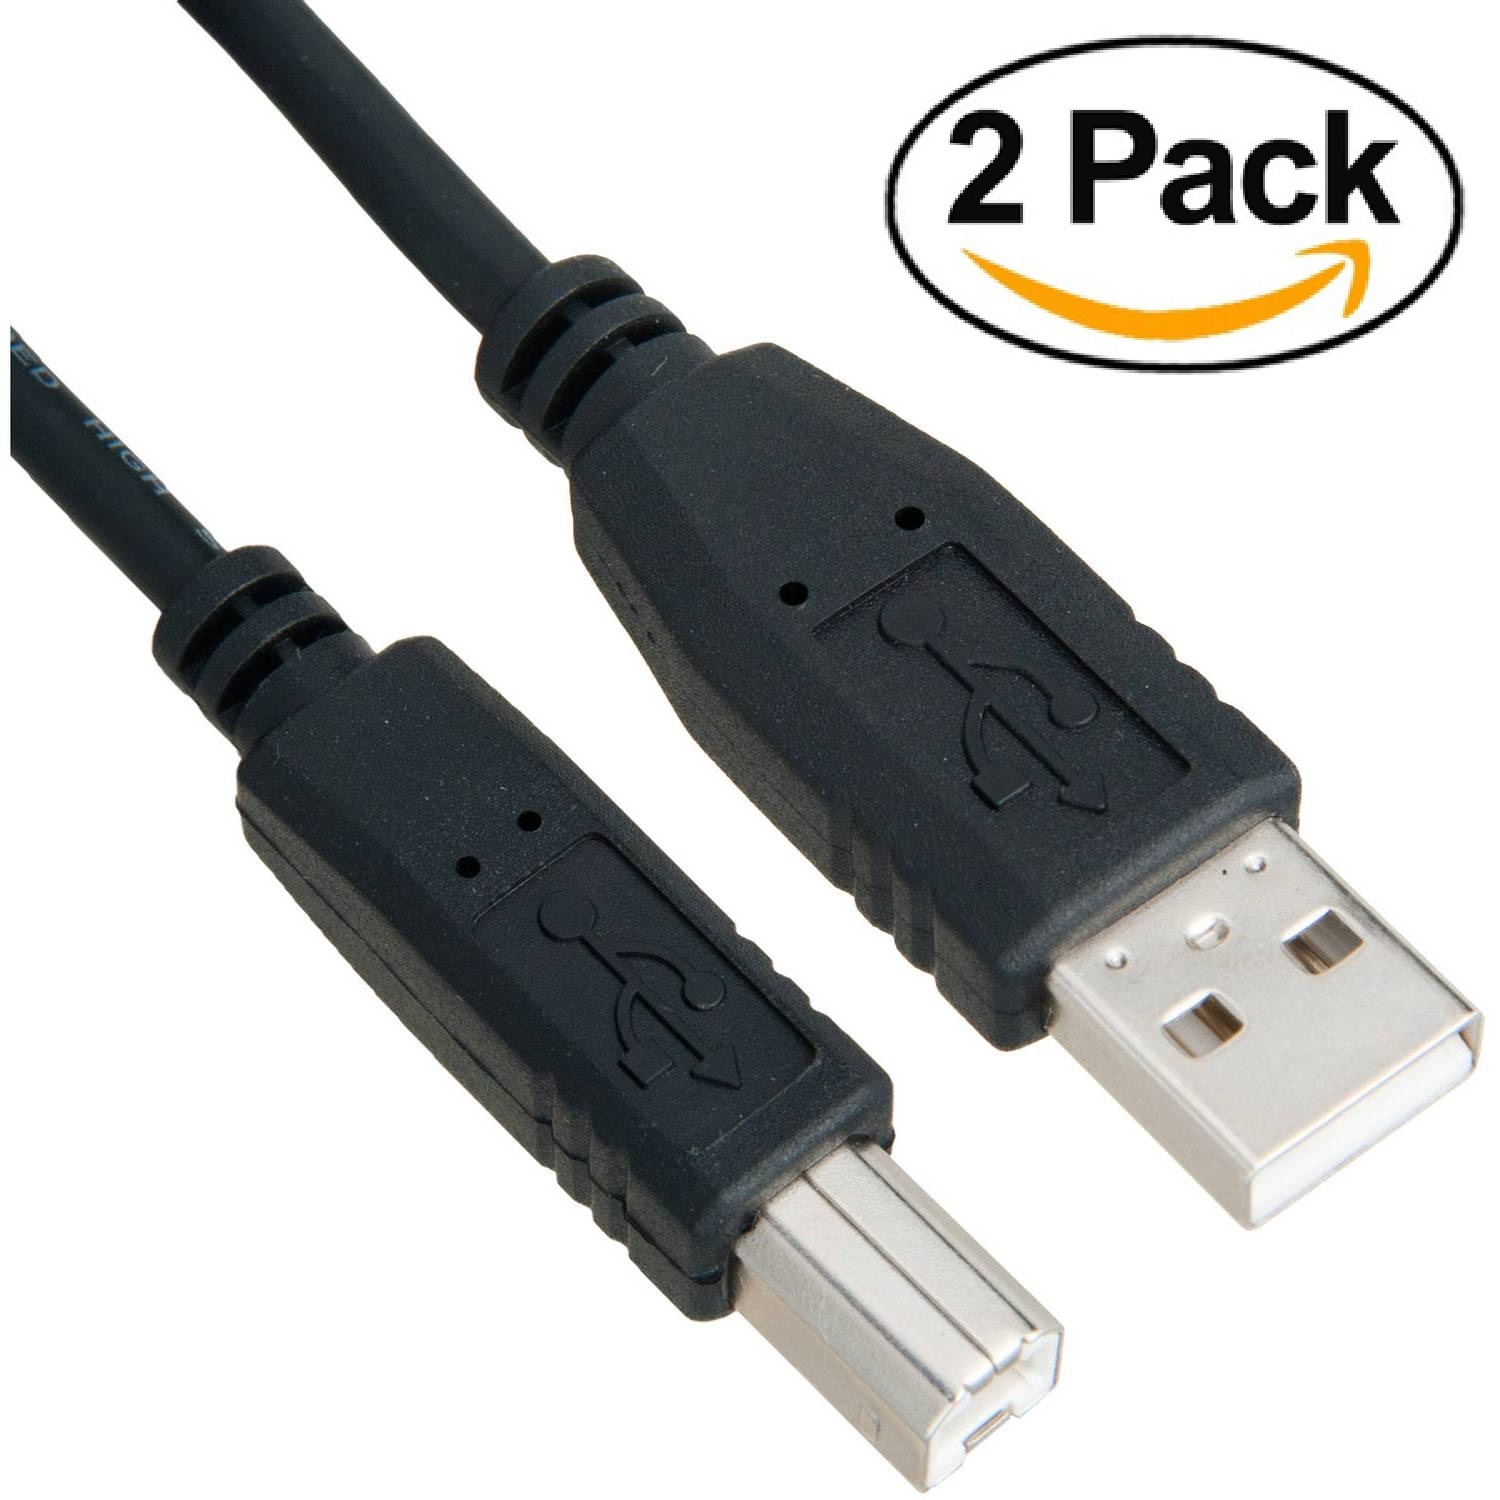 Cable Builders [2-PACK] USB Printer Cable USB Type A Male to B Male Cable (6FT x 2) High Speed USB 2.0 Type A-B 6ft x 2 Cords for Printers - image 1 of 2